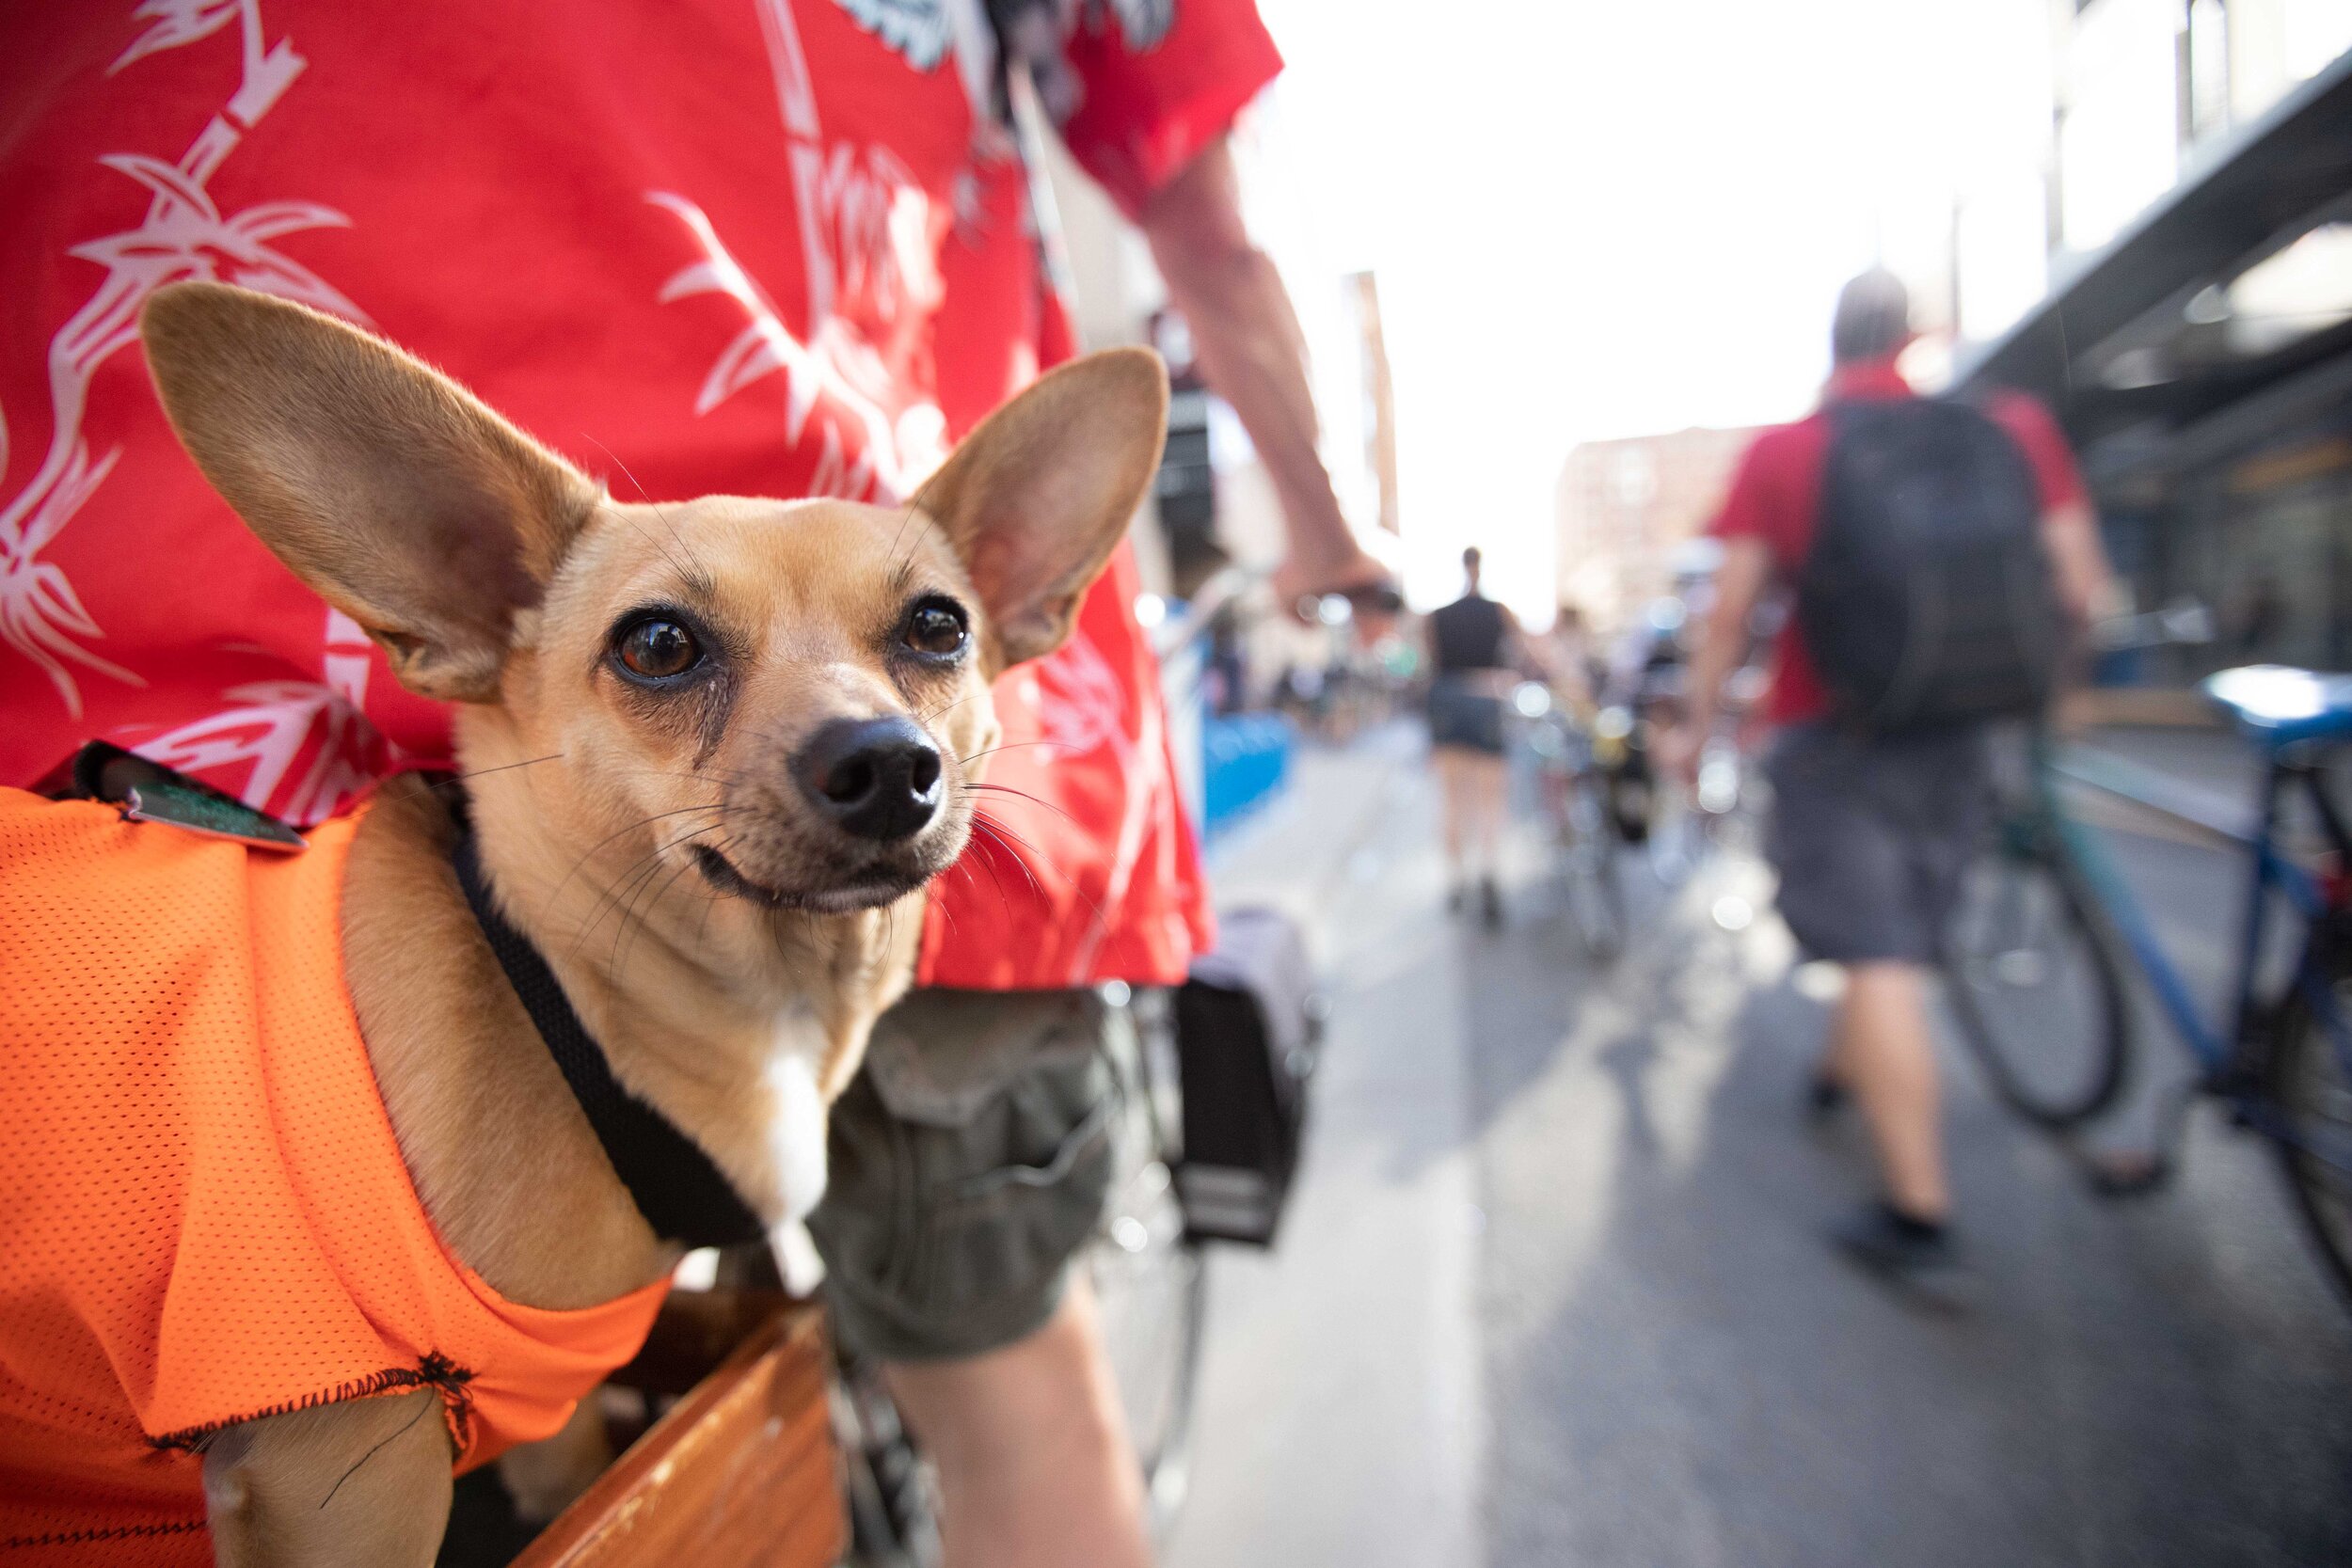  A Chihuahua looks back at protesters as its owner helps stop traffic at the protest in Minneapolis, Minnesota on Jun 3, 2020. 